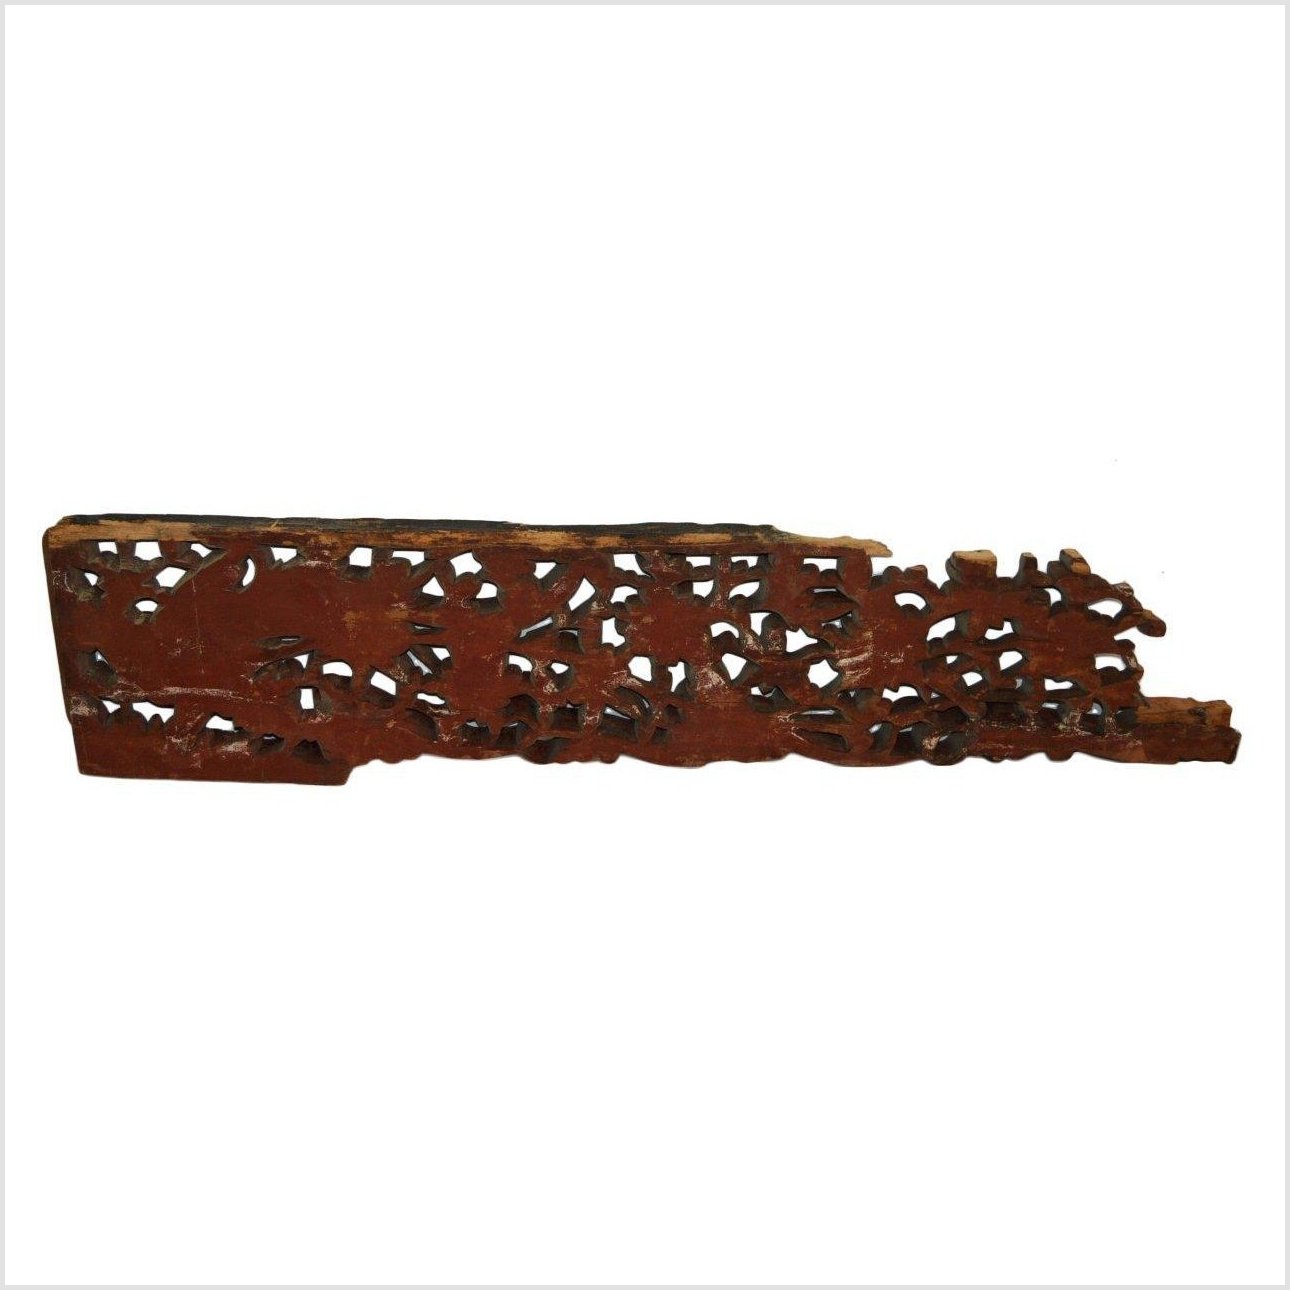 ANTIQUE HAND CARVED WALL ORNAMENT